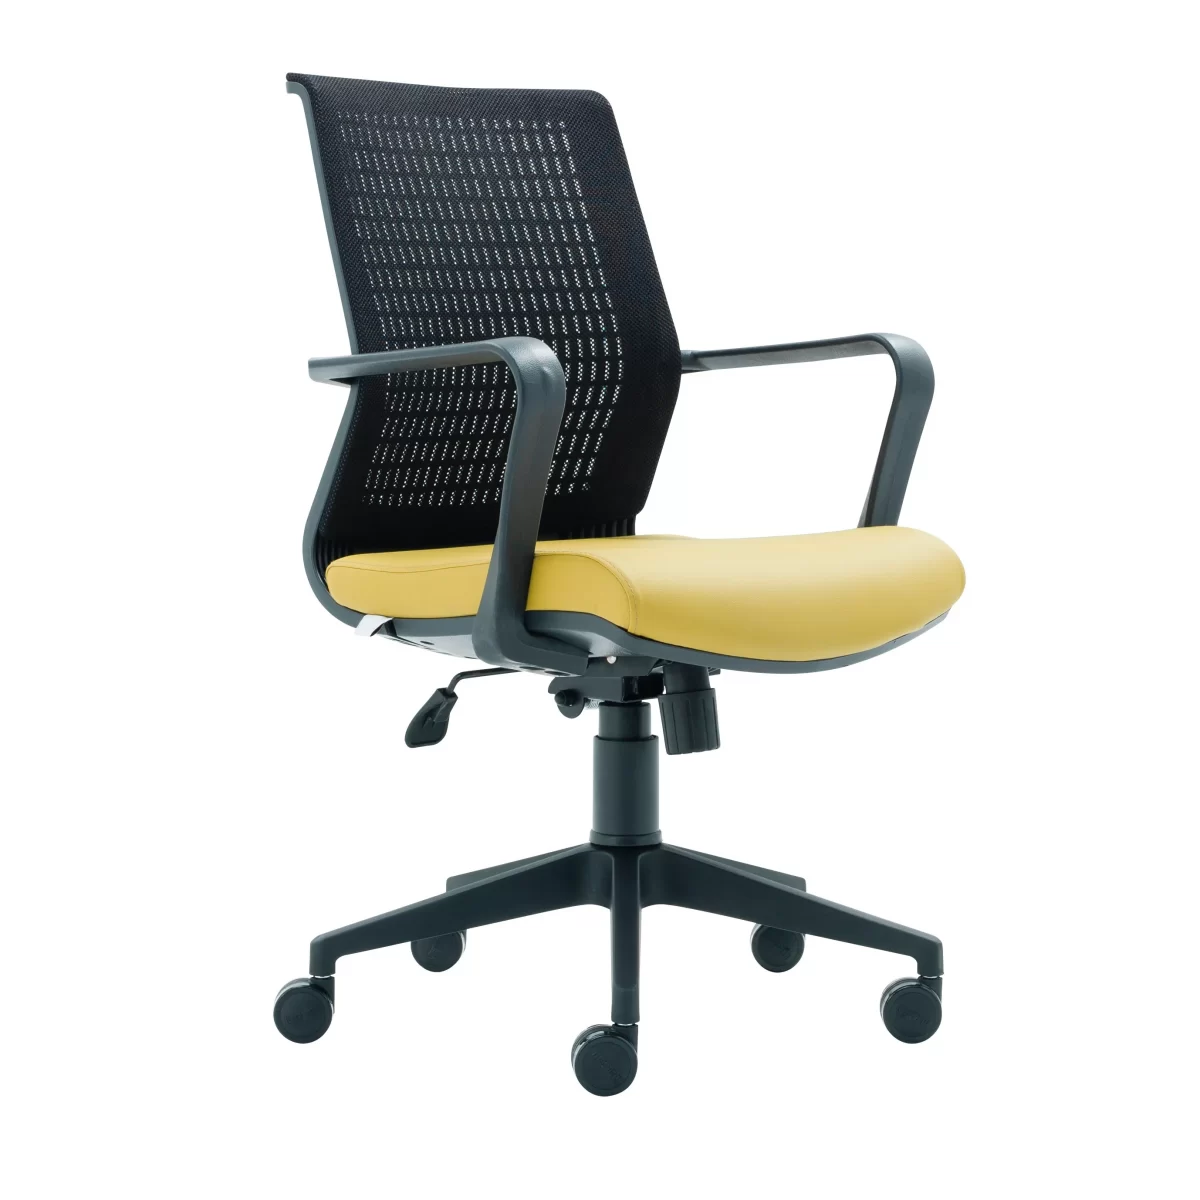 Visha Pl Manager Office Chair Plastic Legs 3 scaled